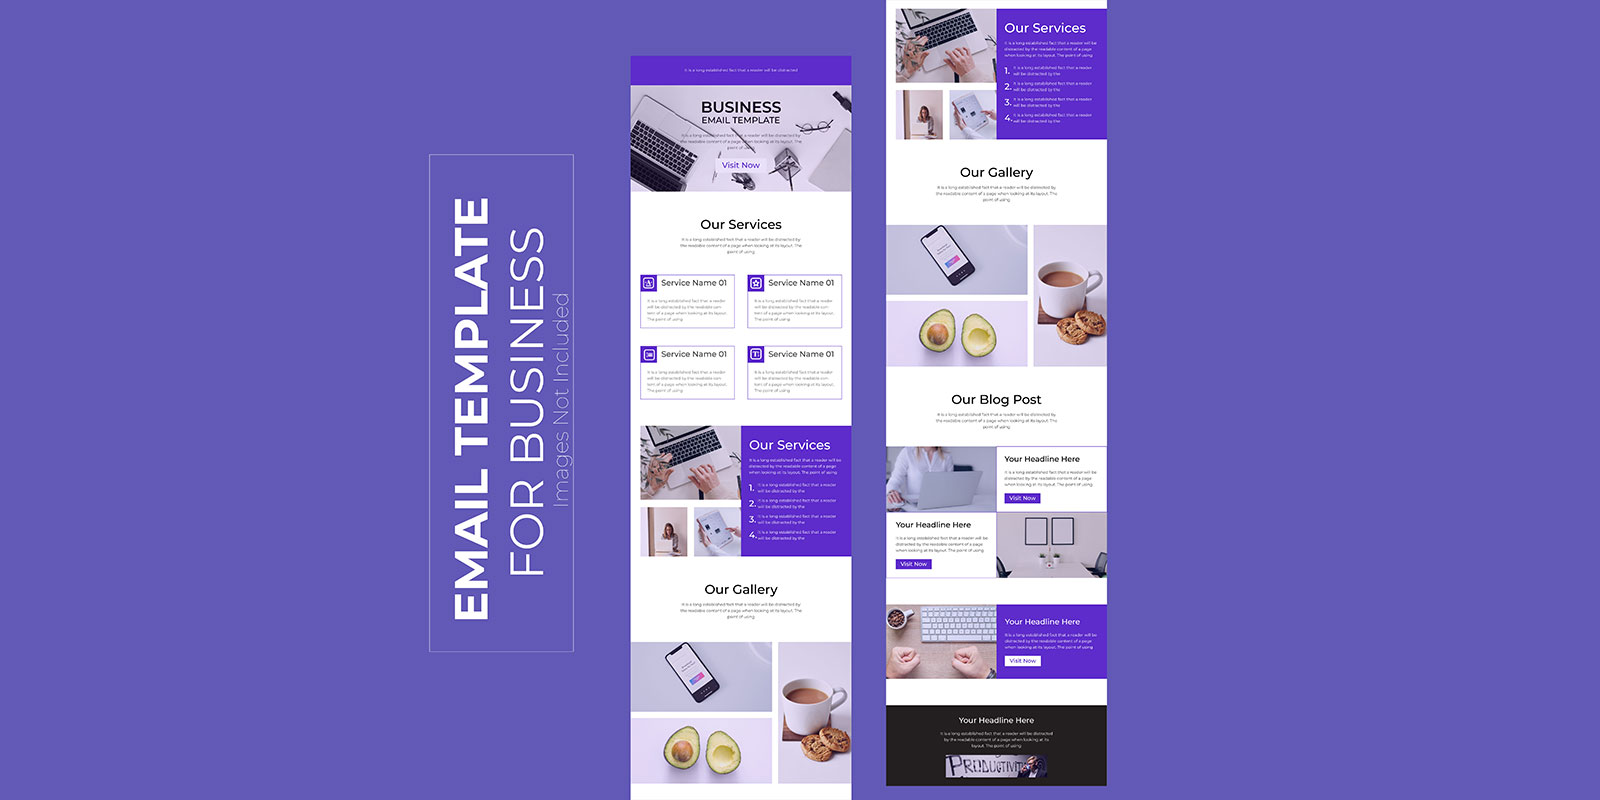 Elegant and Professional business email marketing template design